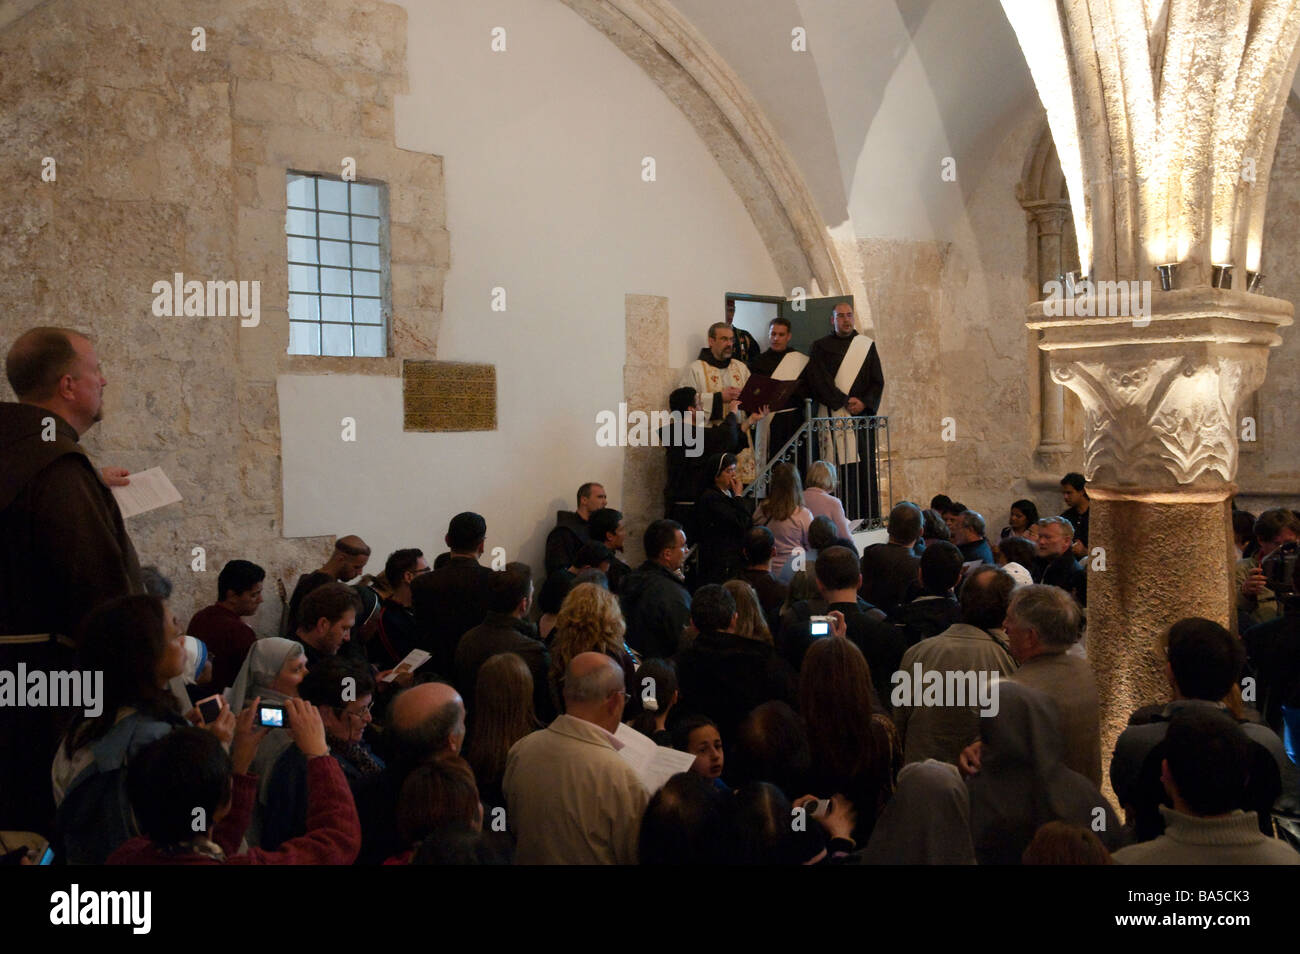 Israel Jerusalem Old city Mount Zion Coenaculum site of the last supper easter celebrations Stock Photo